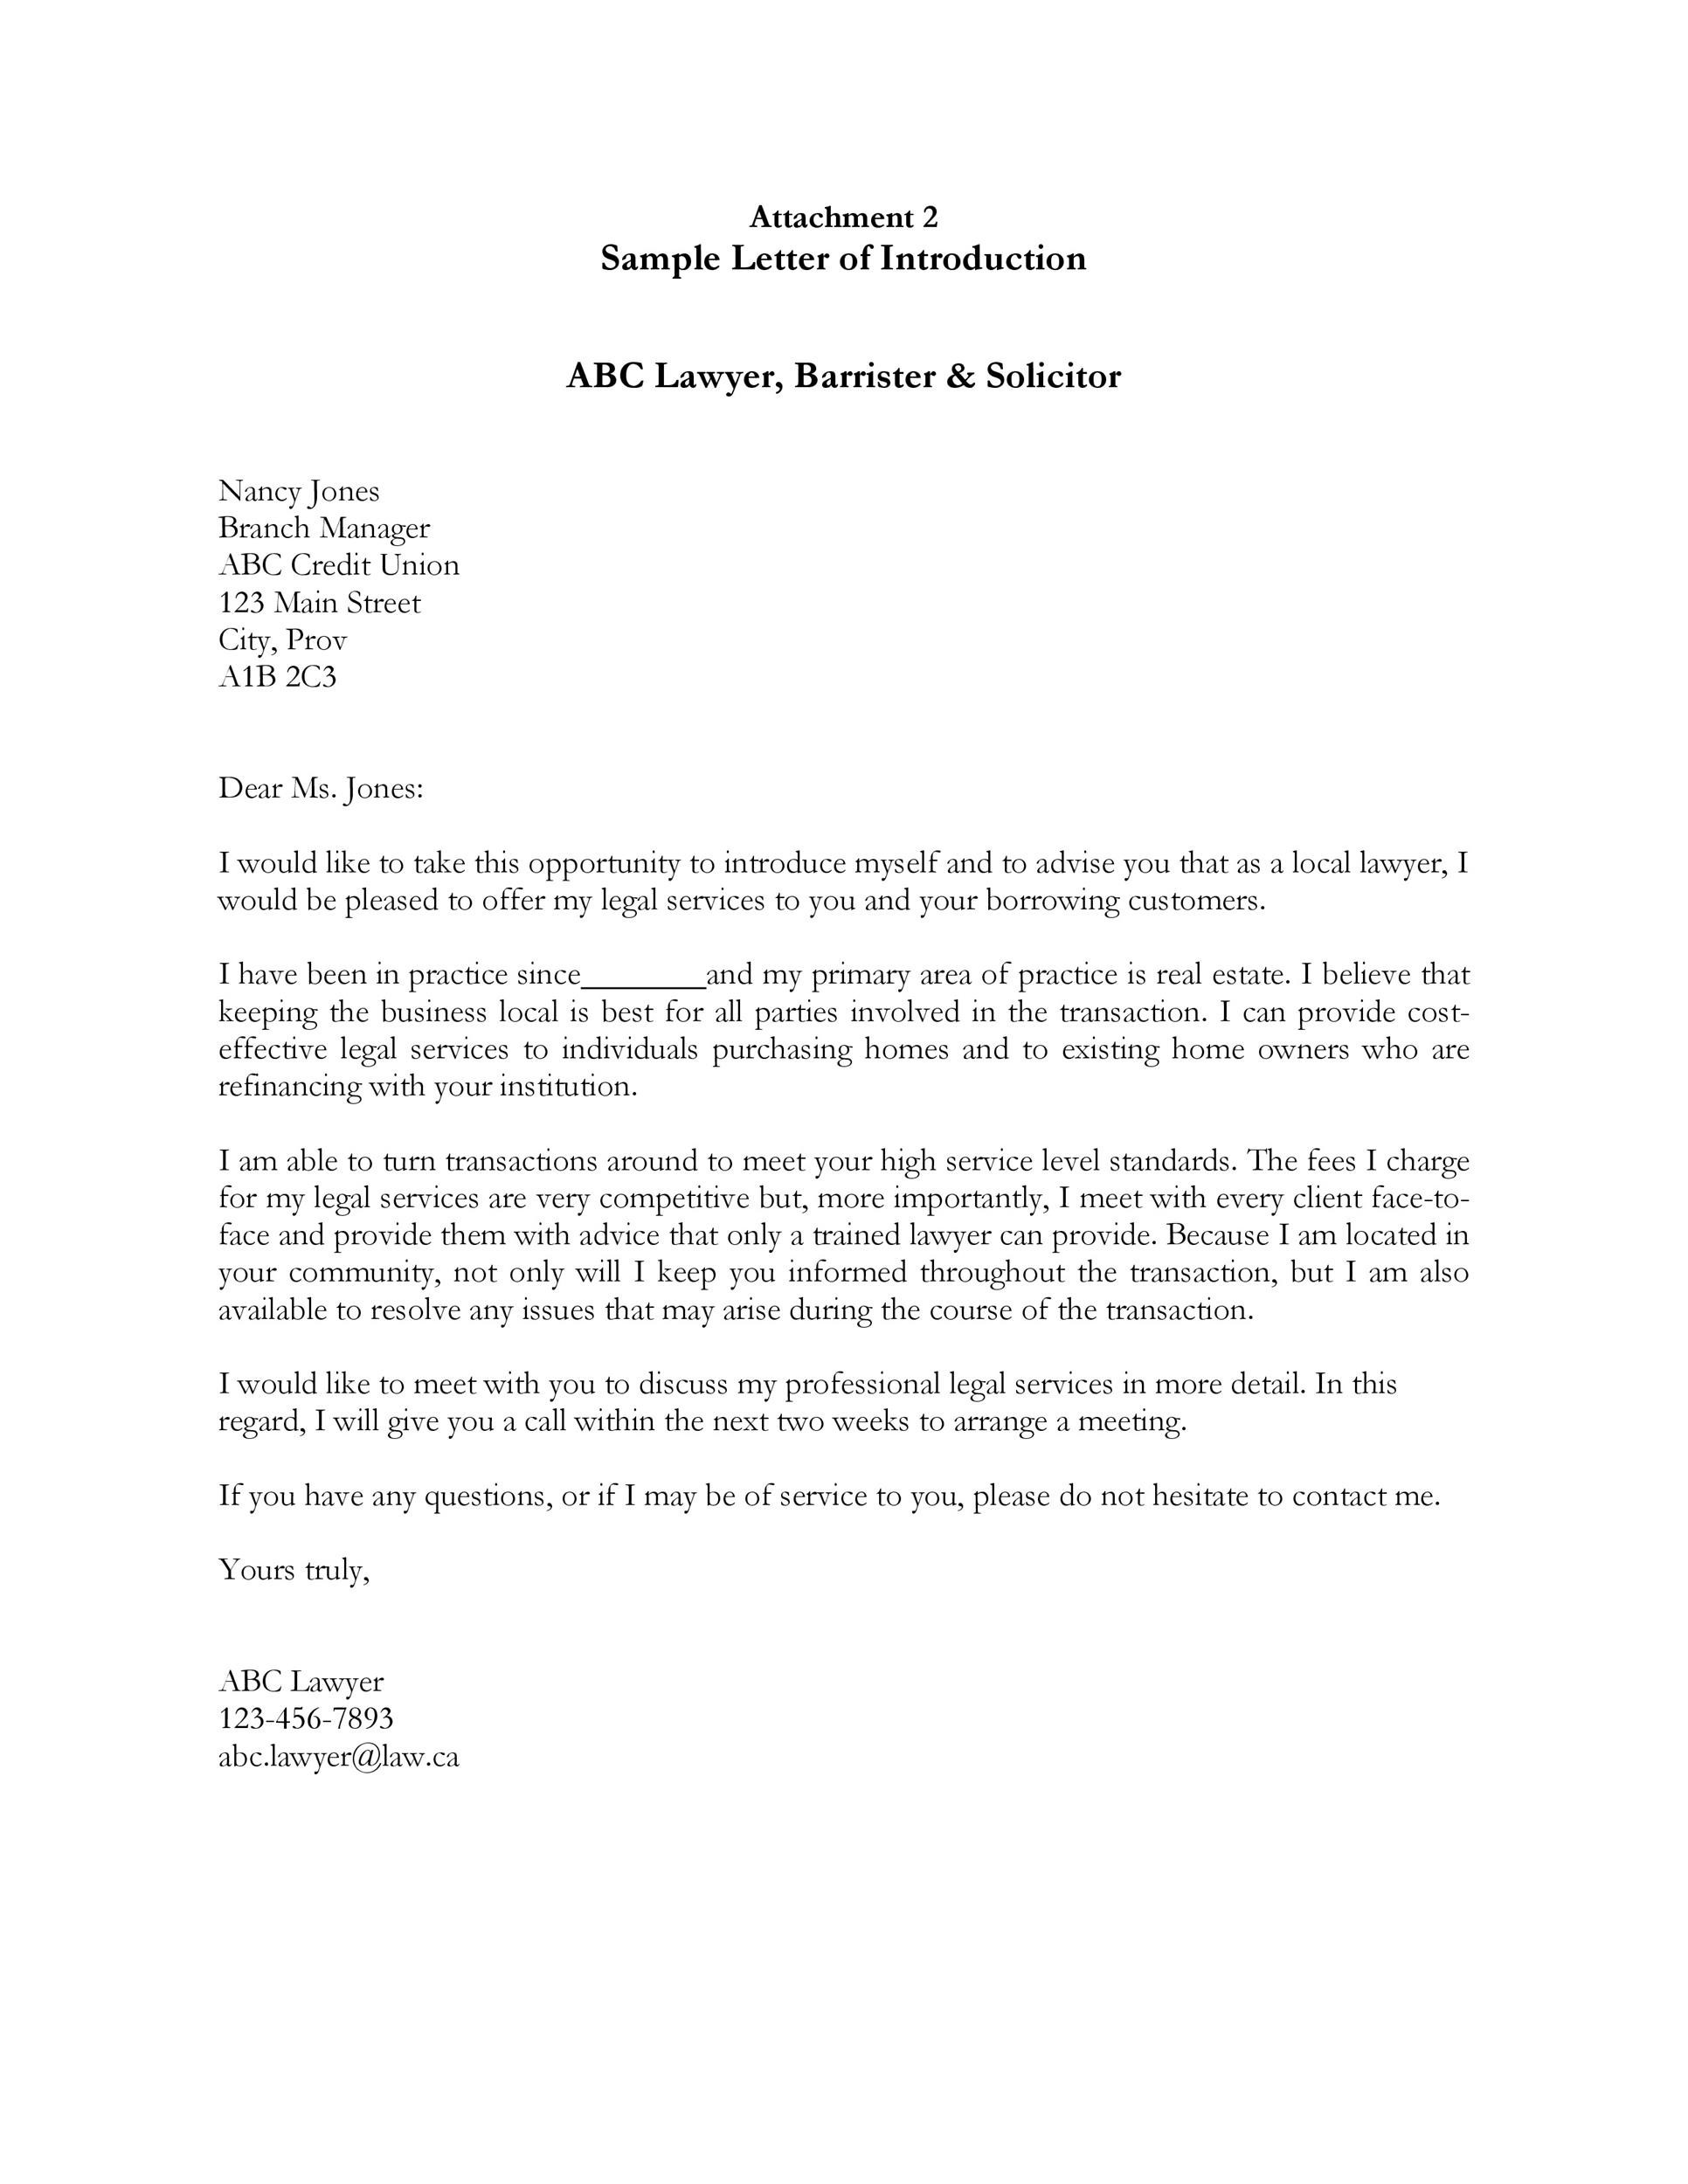 Free business introduction letter 23